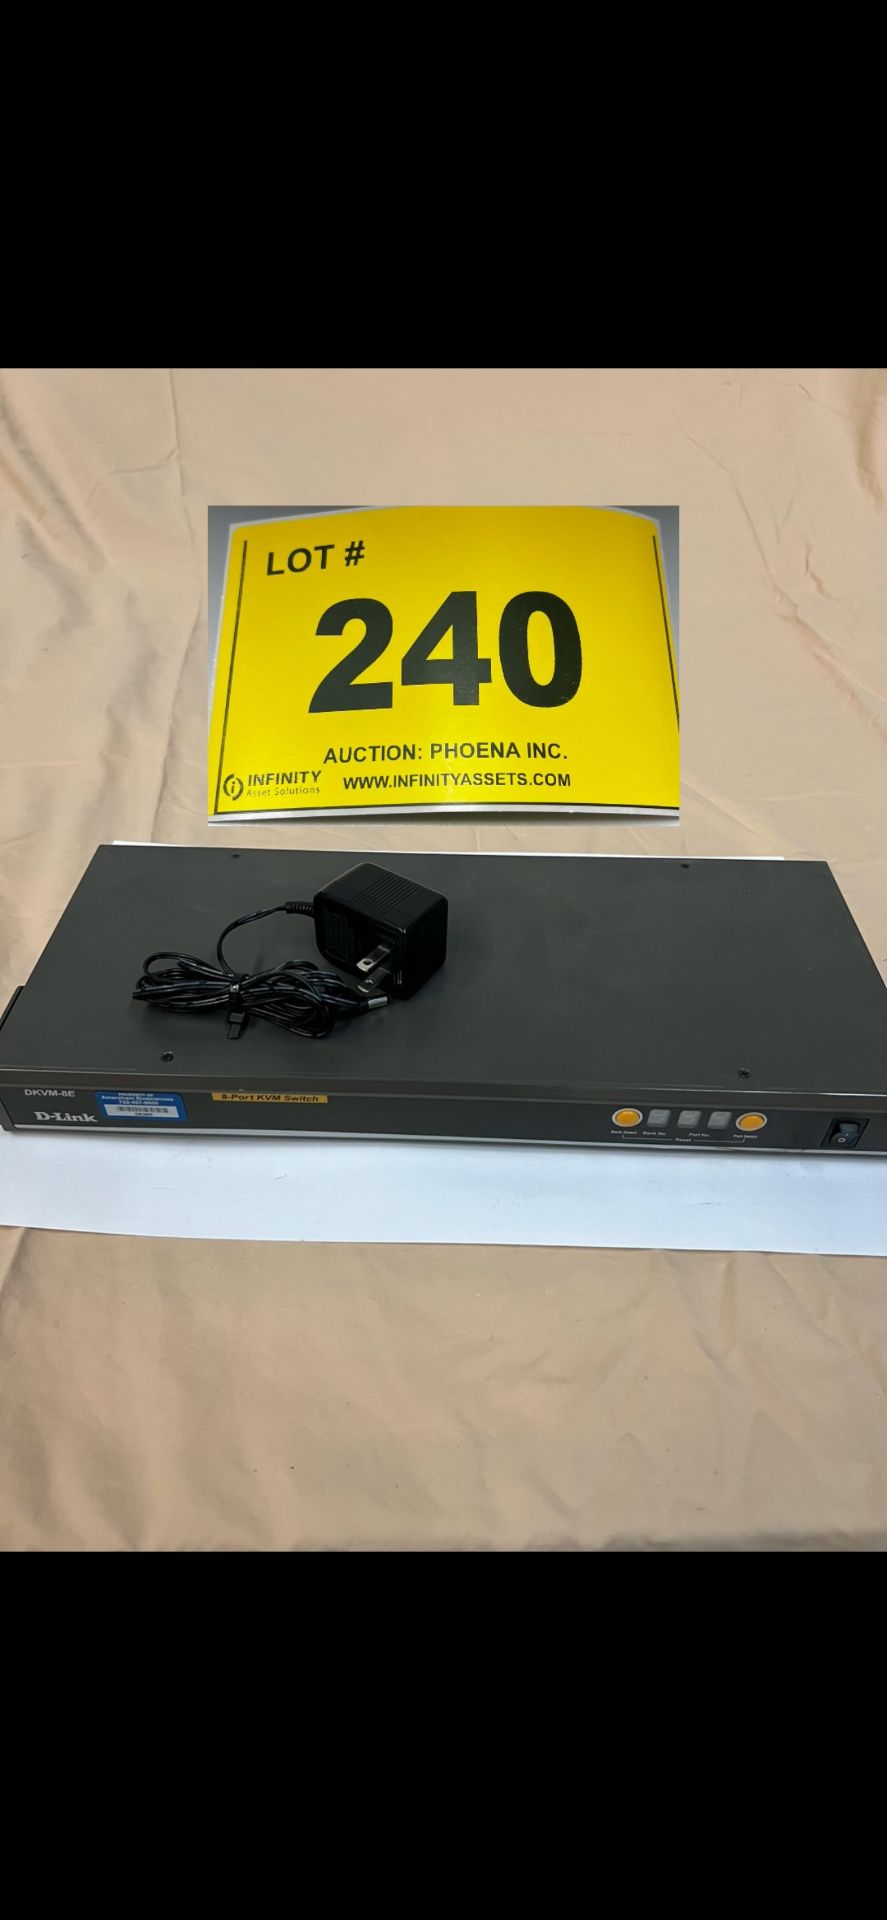 D-LINK DKVM-8E/A 8-PORT KVM SWITCH (INCLUDES POWER CORD), S/N 21016700104 (LOCATED IN TORONTO,